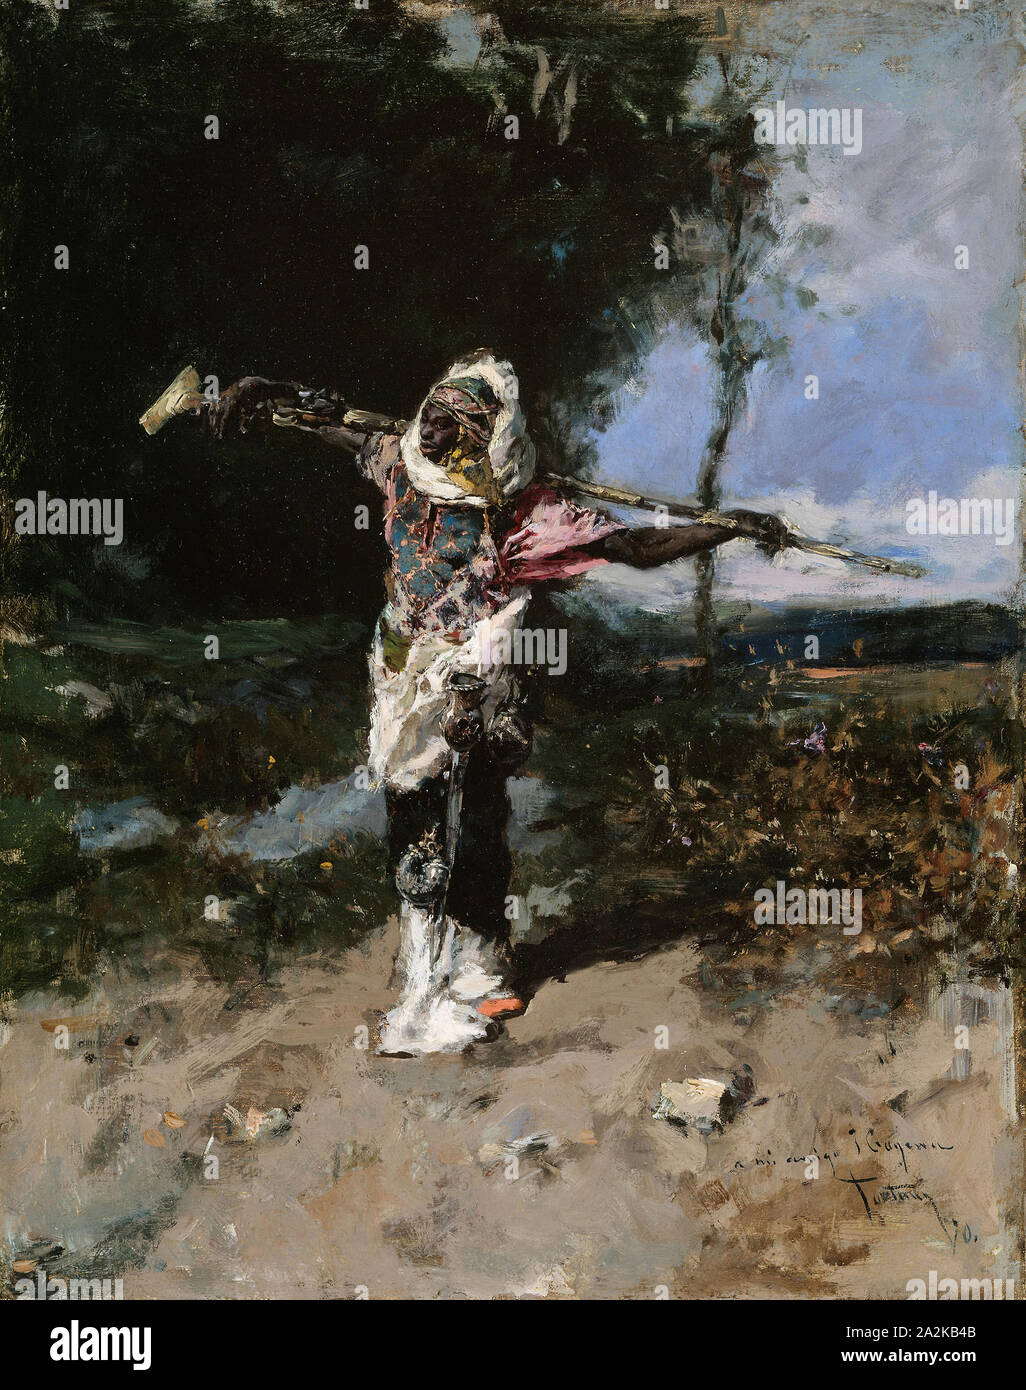 African Chief, 1870, Mariano Fortuny y Marsal, Spanish, 1838-1874, Spain, Oil on canvas, 41 x 32.9 cm (16 1/8 x 12 15/16 in Stock Photo